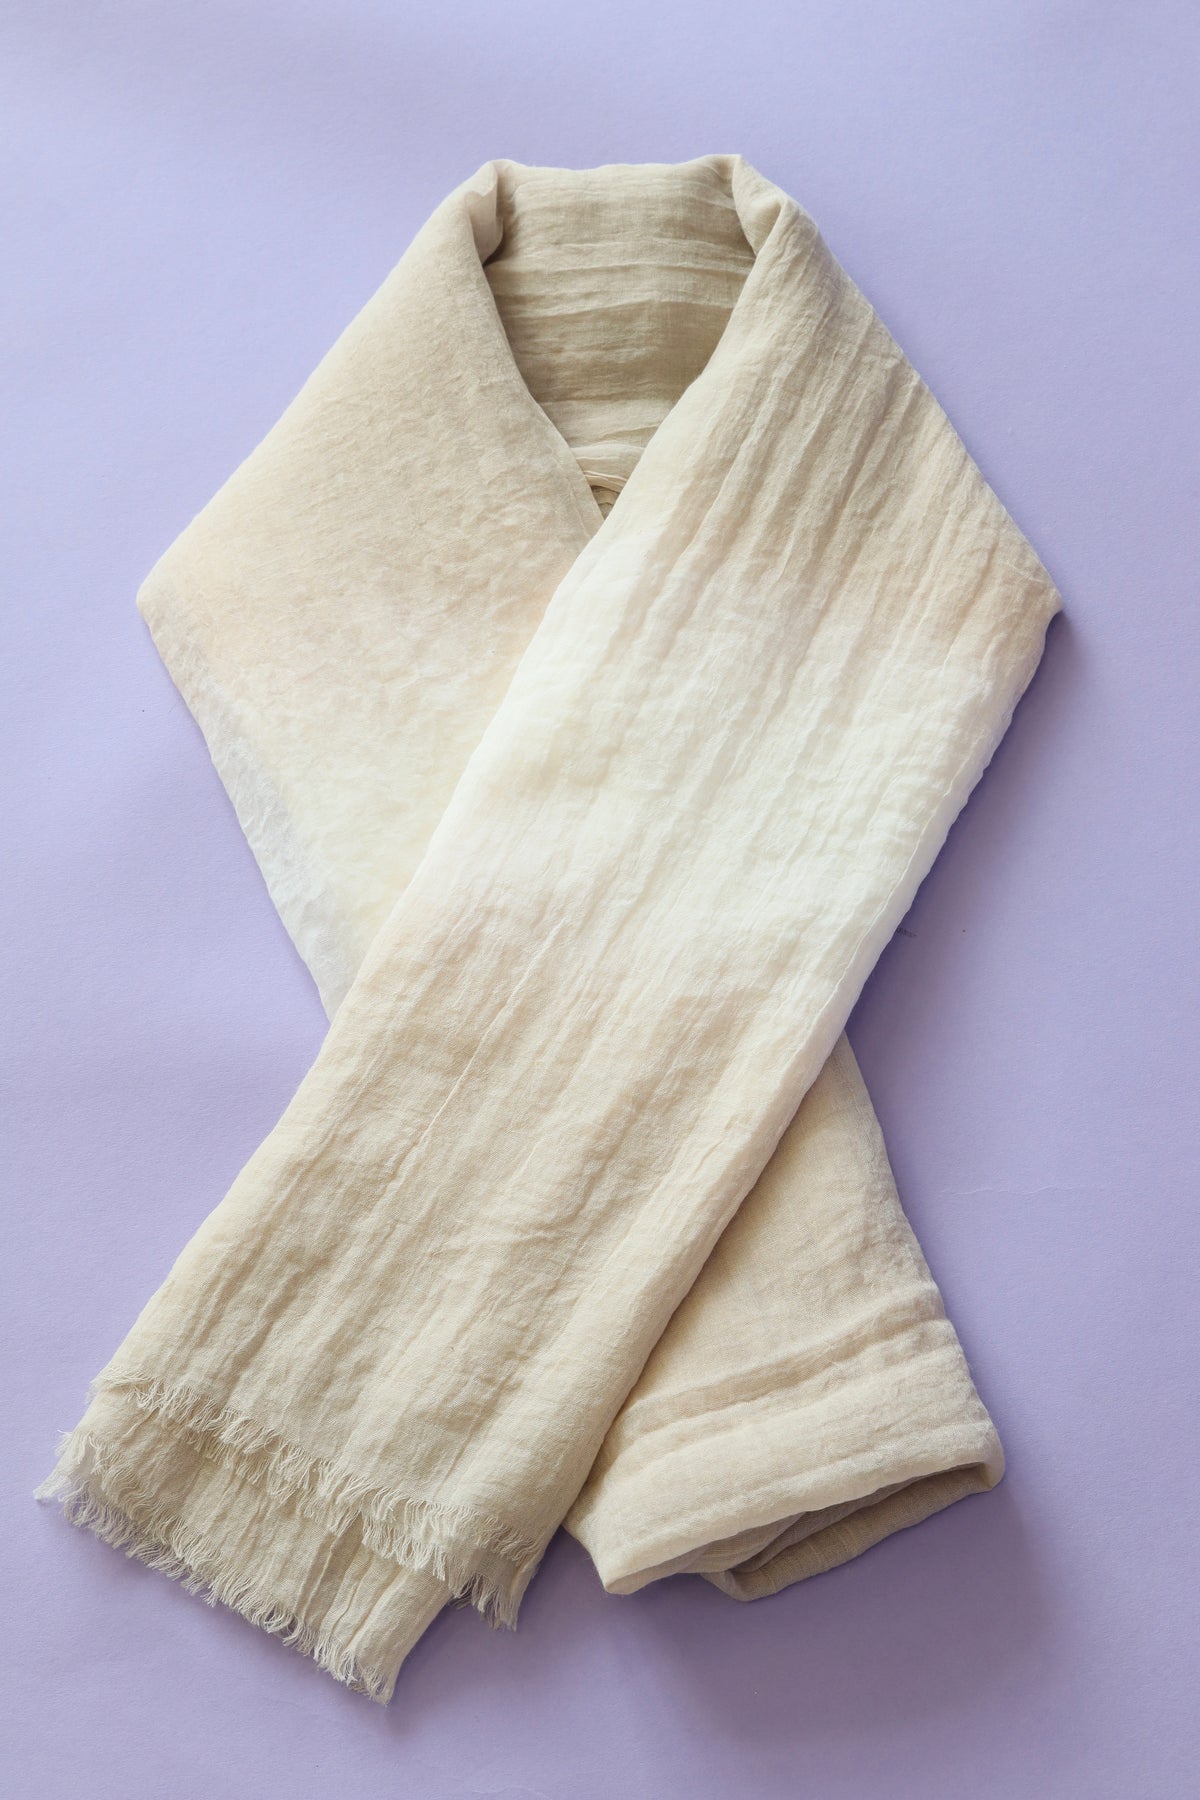 Alex Scarf in Taupe